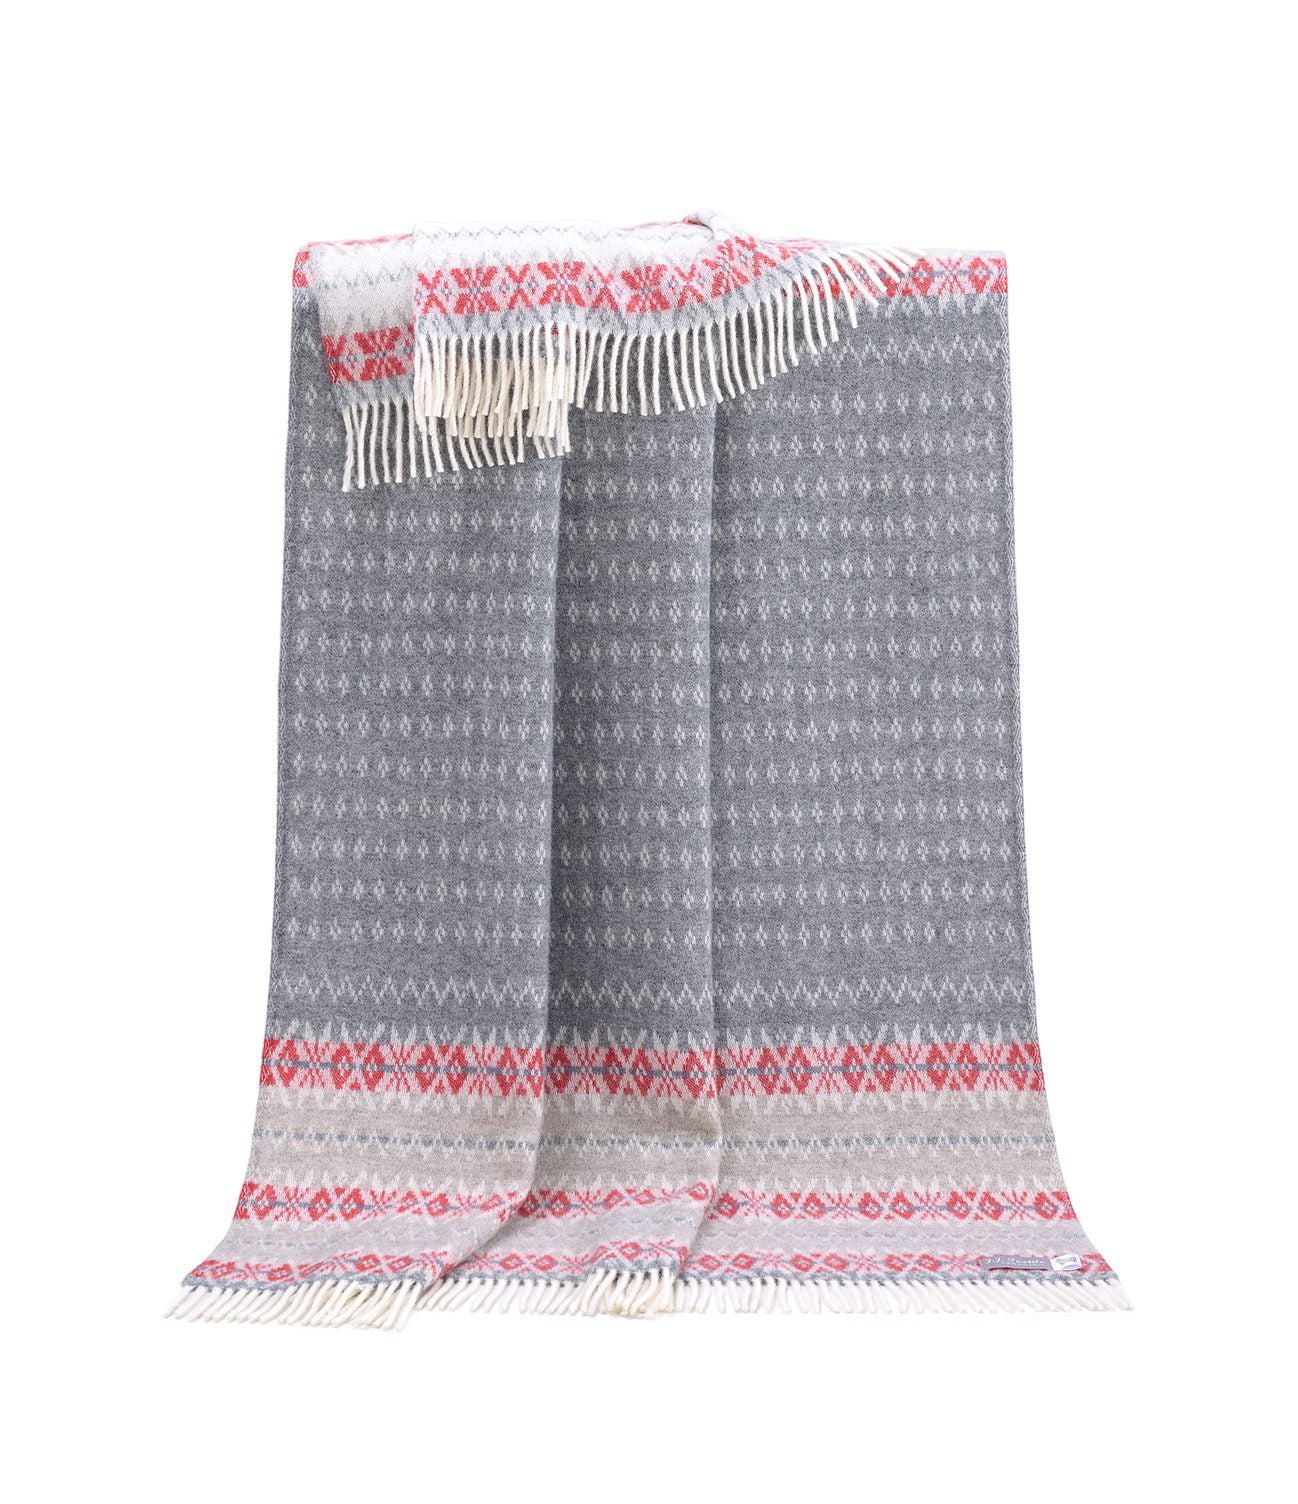 Nord Wool Throw blanket  in grey, taupe and vibrant red tones. 